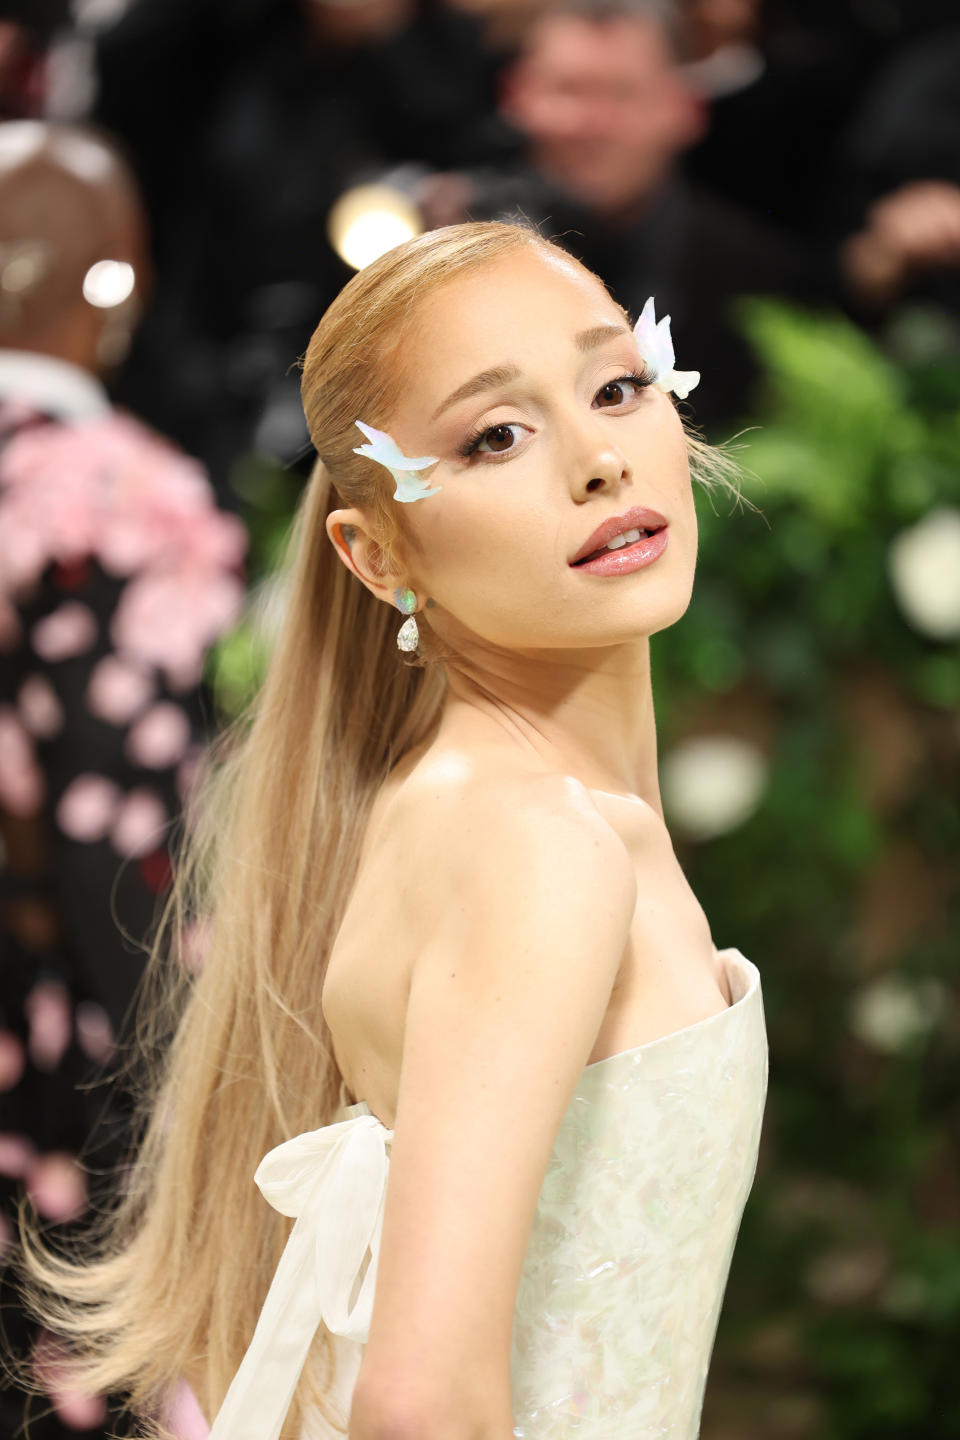 Ariana Grande on the red carpet, wearing a strapless gown with intricate detailing, featuring white butterfly accessories in her hair